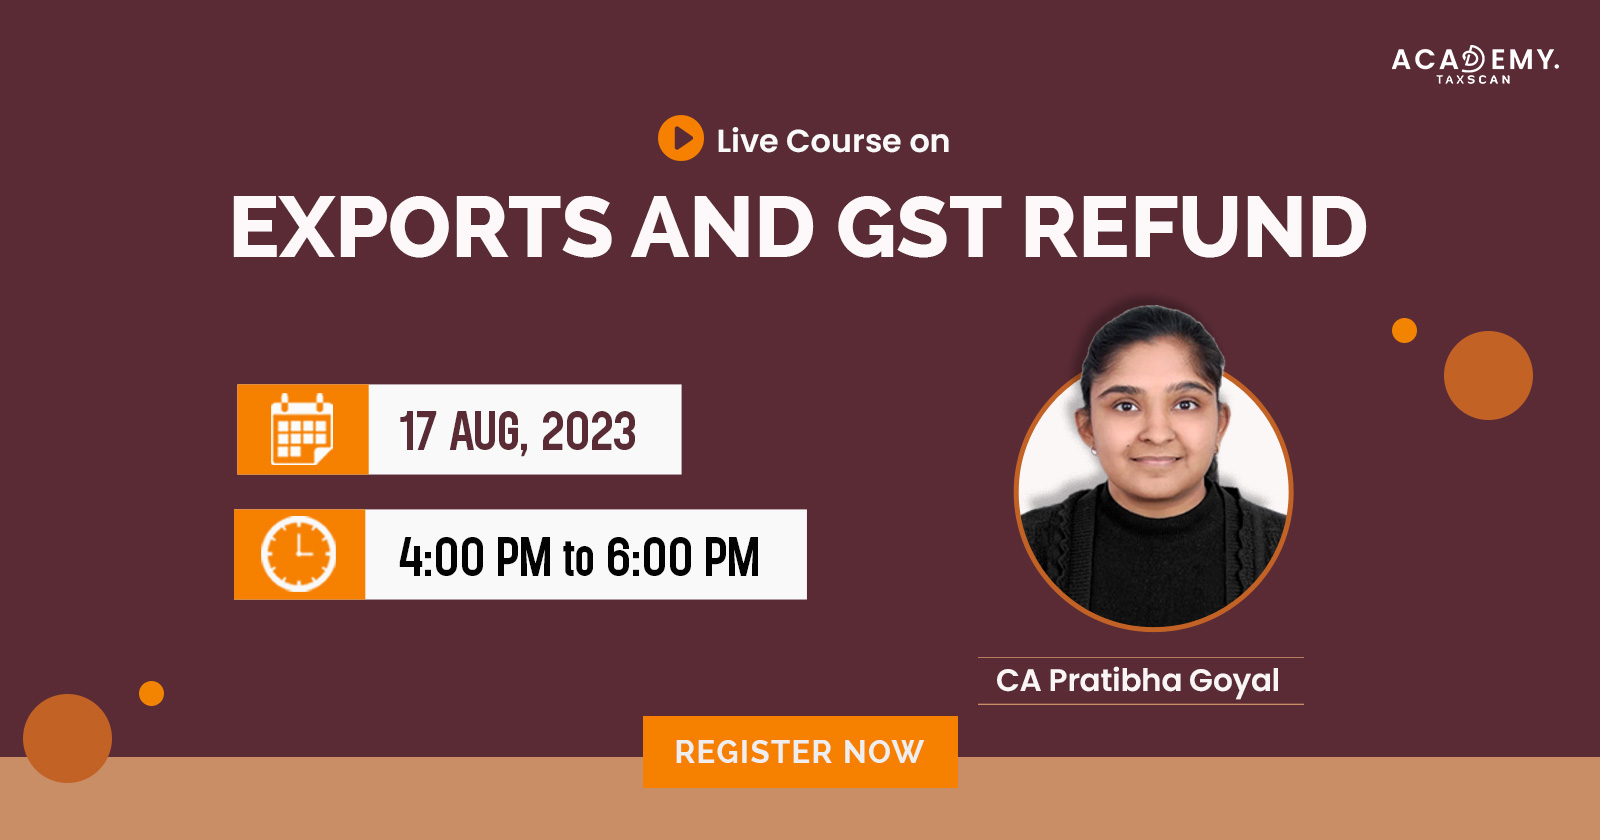 Live Course - Exports and GST Refund - Exports - GST Refund - Refund - GST - GST Live Course - GST Course - online certificate course - certificate course 2023 -  Taxscan Academy